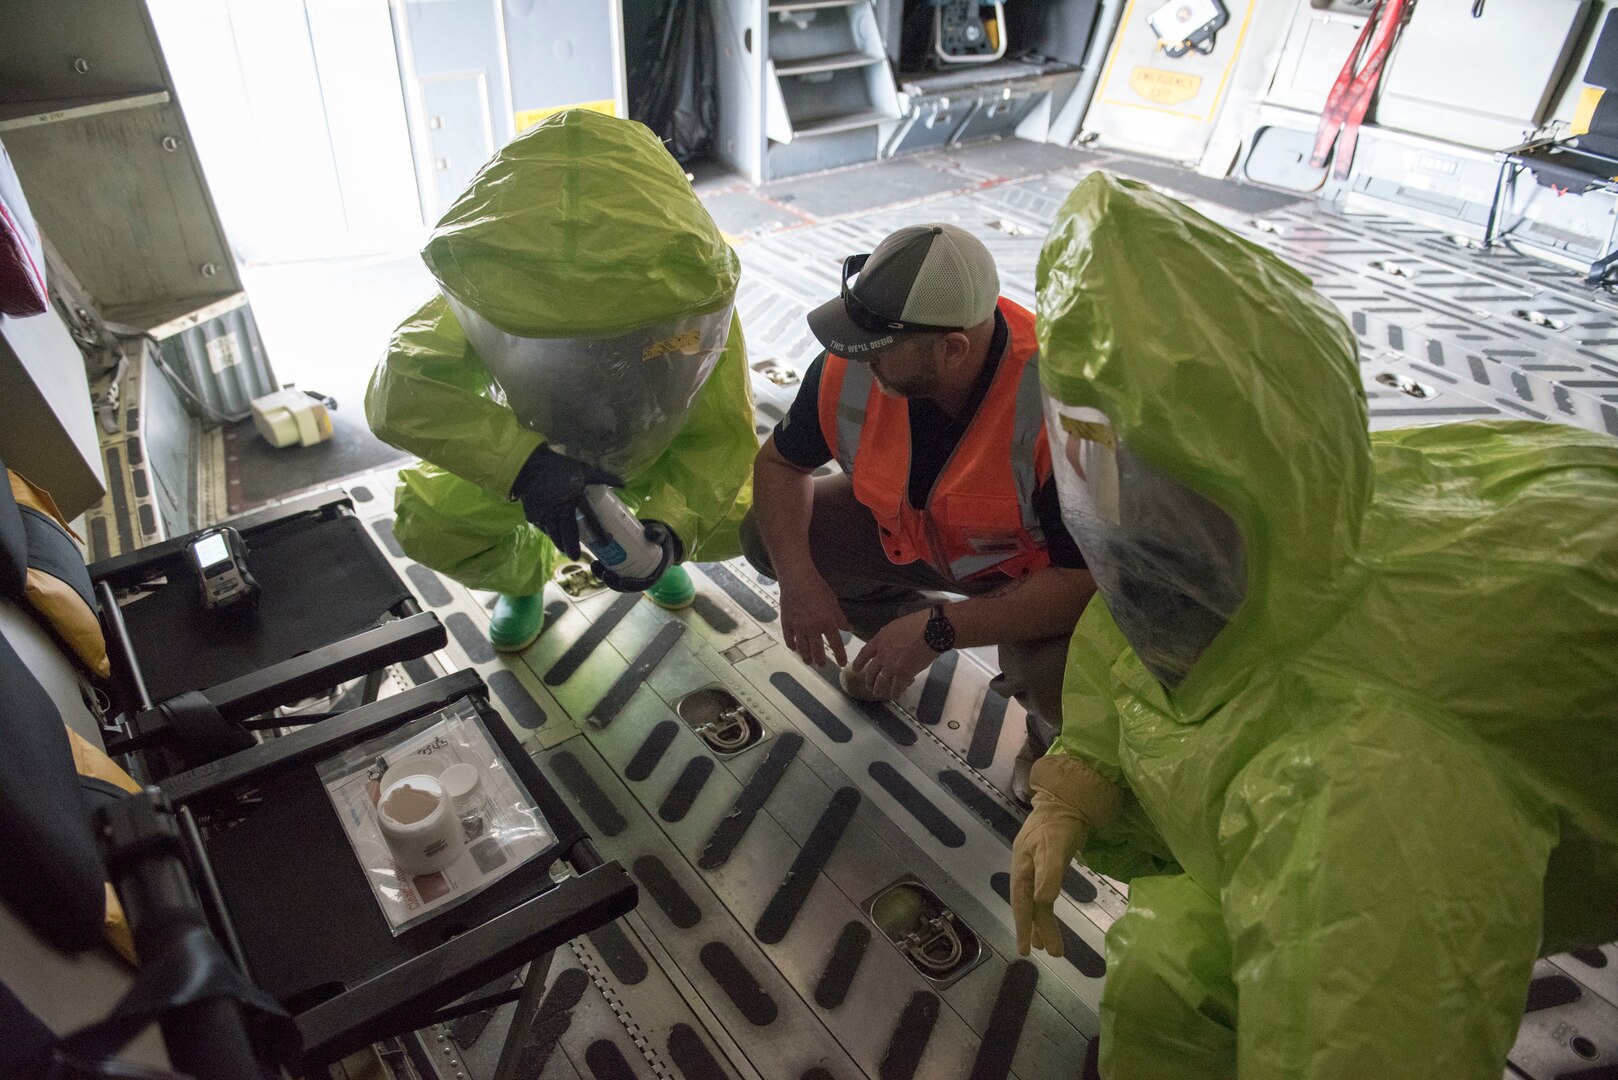 Chris Keesee, center, CBRN training project manager for Federal Resources, assists U.S. Air Force 1st Lt Samuel Gerard, with 167th bioenvironmental engineering, and Staff Sgt. Austin Lloyd, 167th Airlift Wing firefighter, as they test an unknown substance on a C-17 Globemaster III aircraft as part of a Counter CBRN (Chemical, Biological, Radiological, and Nuclear) All-Hazard Management Response, or CAMR, exercise at the 167th AW, Shepherd Field, Martinsburg, West Virginia, April 30, 2021. CAMR is a hybrid program of classroom lecture, discussion and tabletop exercises that culminate in a full scale emergency response exercise.